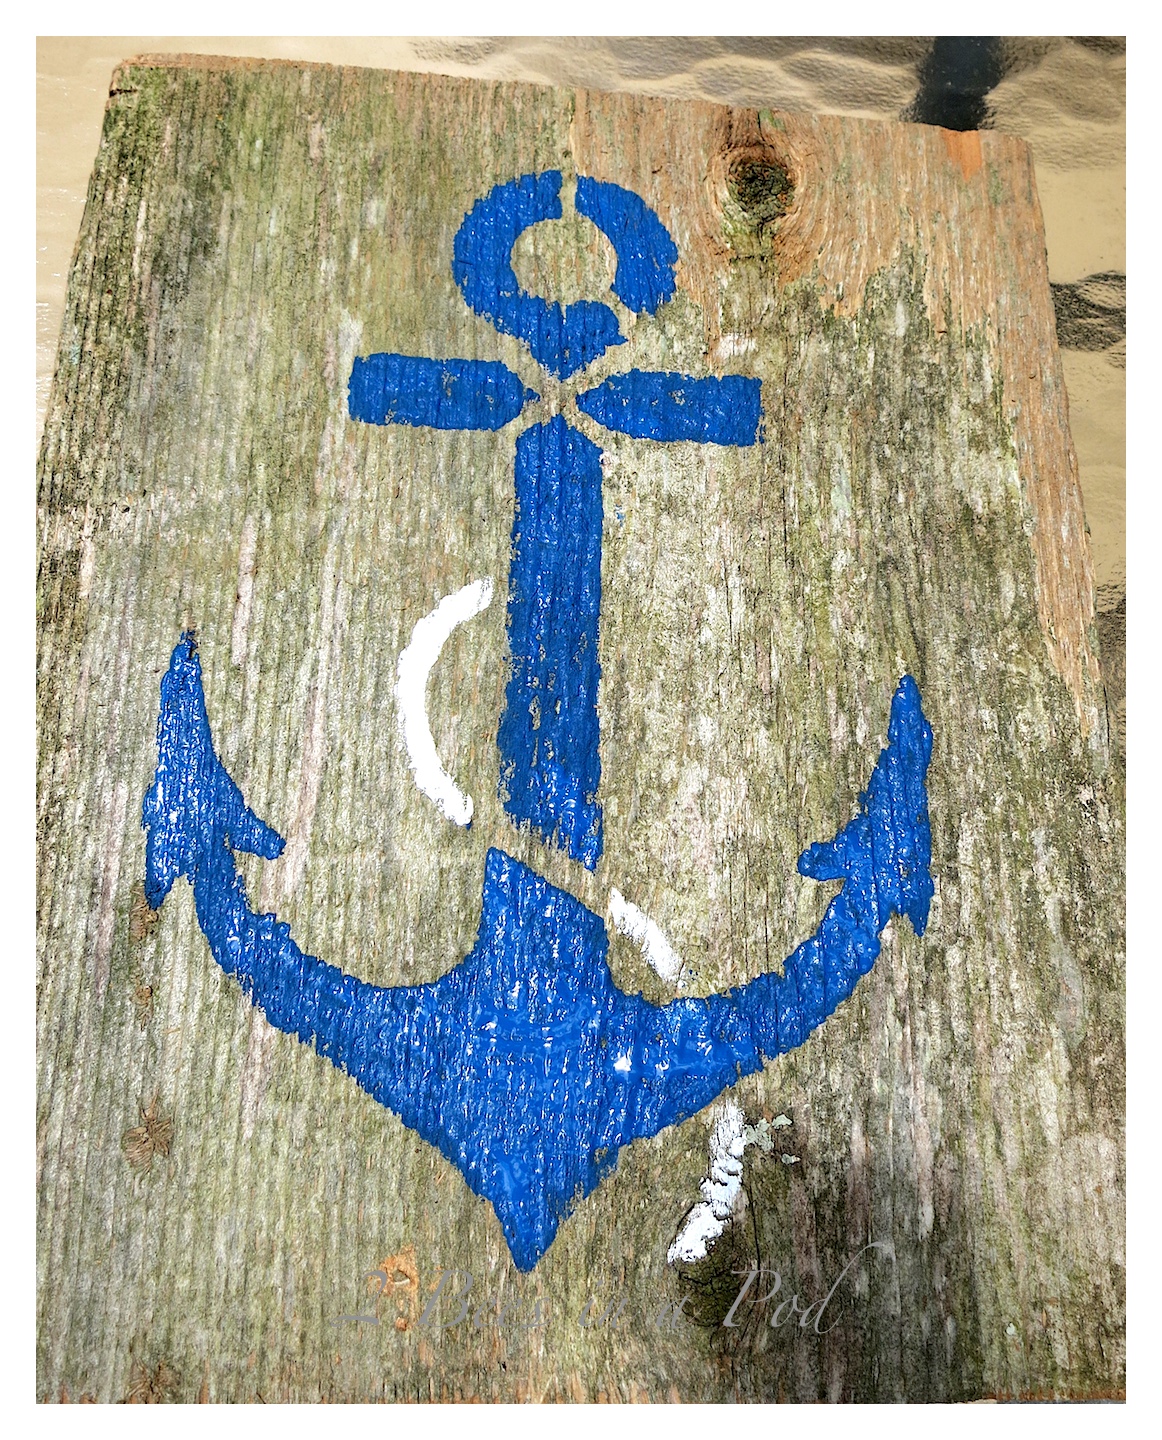 We repurposed old fencing from a friends yard. One of the projects that we did was create patriotic Americana nautical art. We stenciled red, white and blue anchors and then distressed and antiqued the wood.